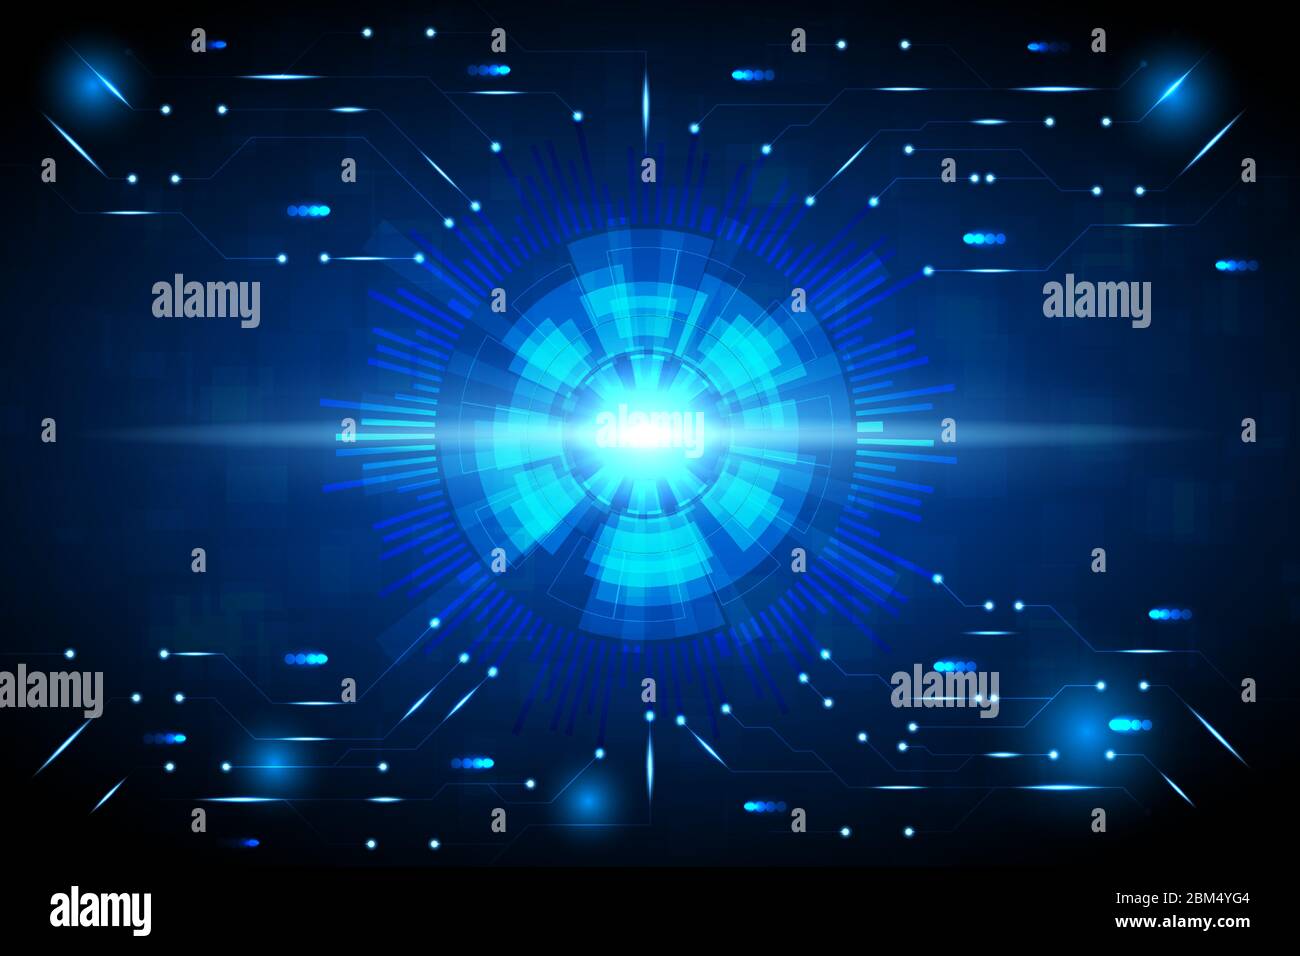 Abstract technology background with hi-tech style circle, light beam and circuit pattern. Stock Vector